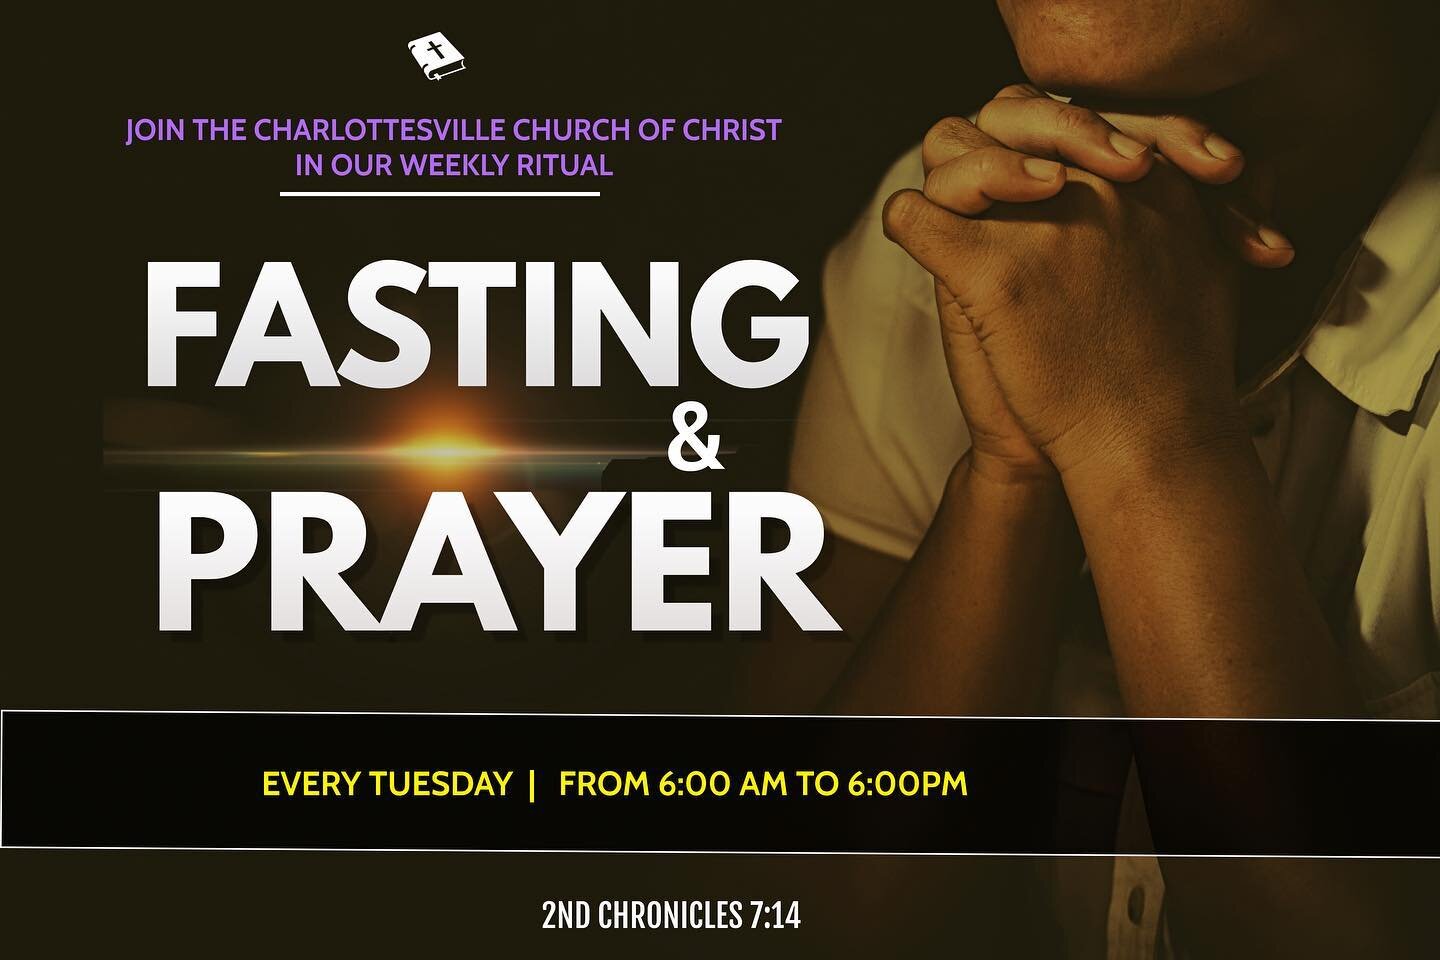 Join us on Tuesday for Fasting &amp; Prayer!